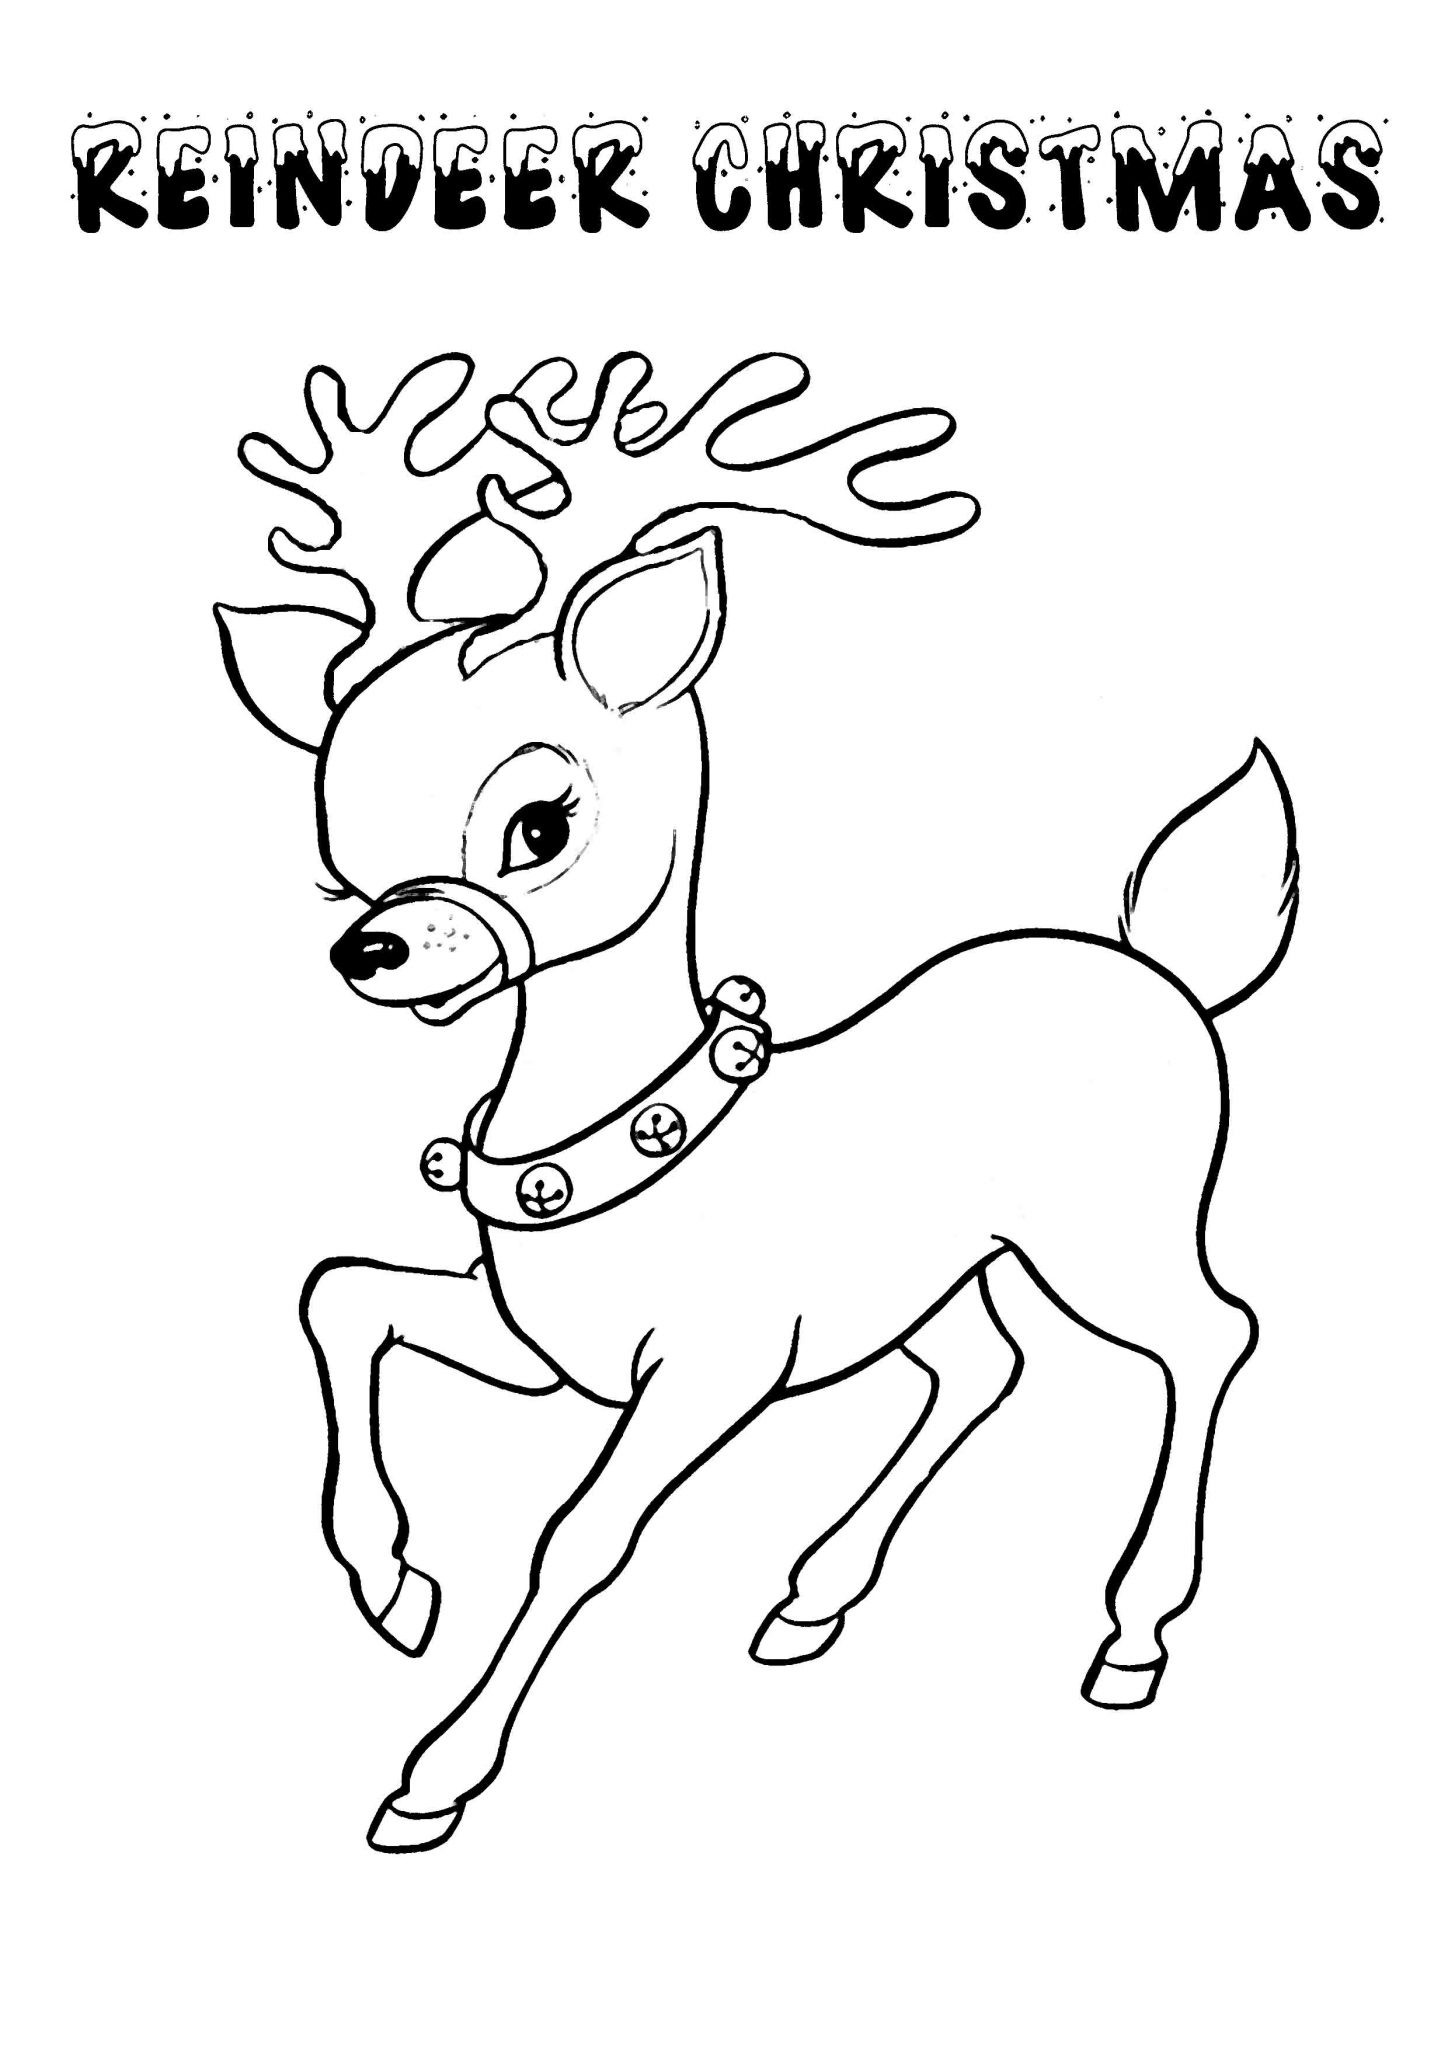 Christmas Coloring Books For Children
 Printable Christmas Coloring Pages for Kids – Best Apps